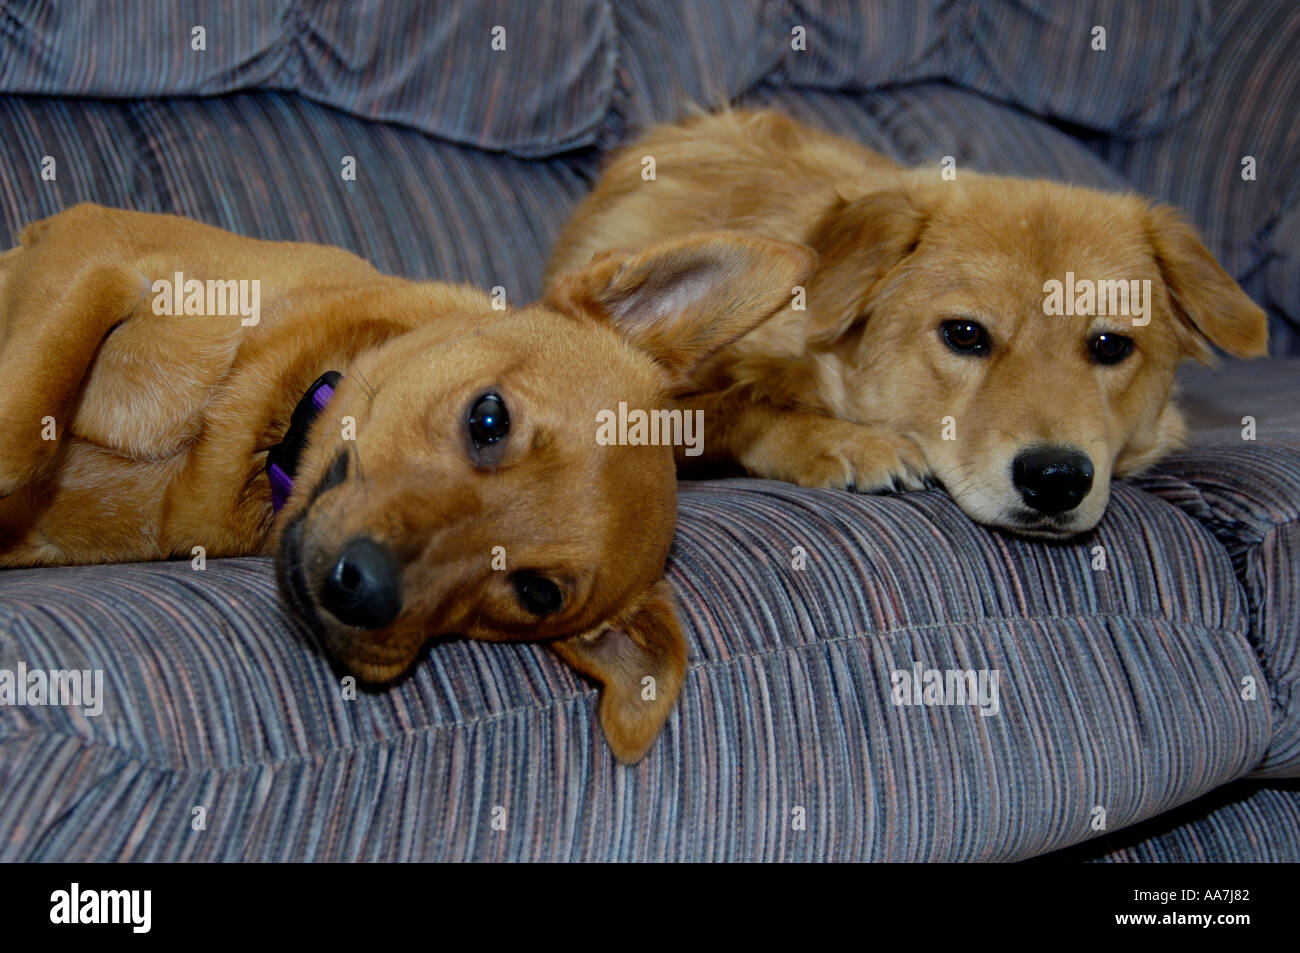 Dogs Playing On Couch Australian Cattle Dog Mix Chester Riley Golden Stock Photo Alamy